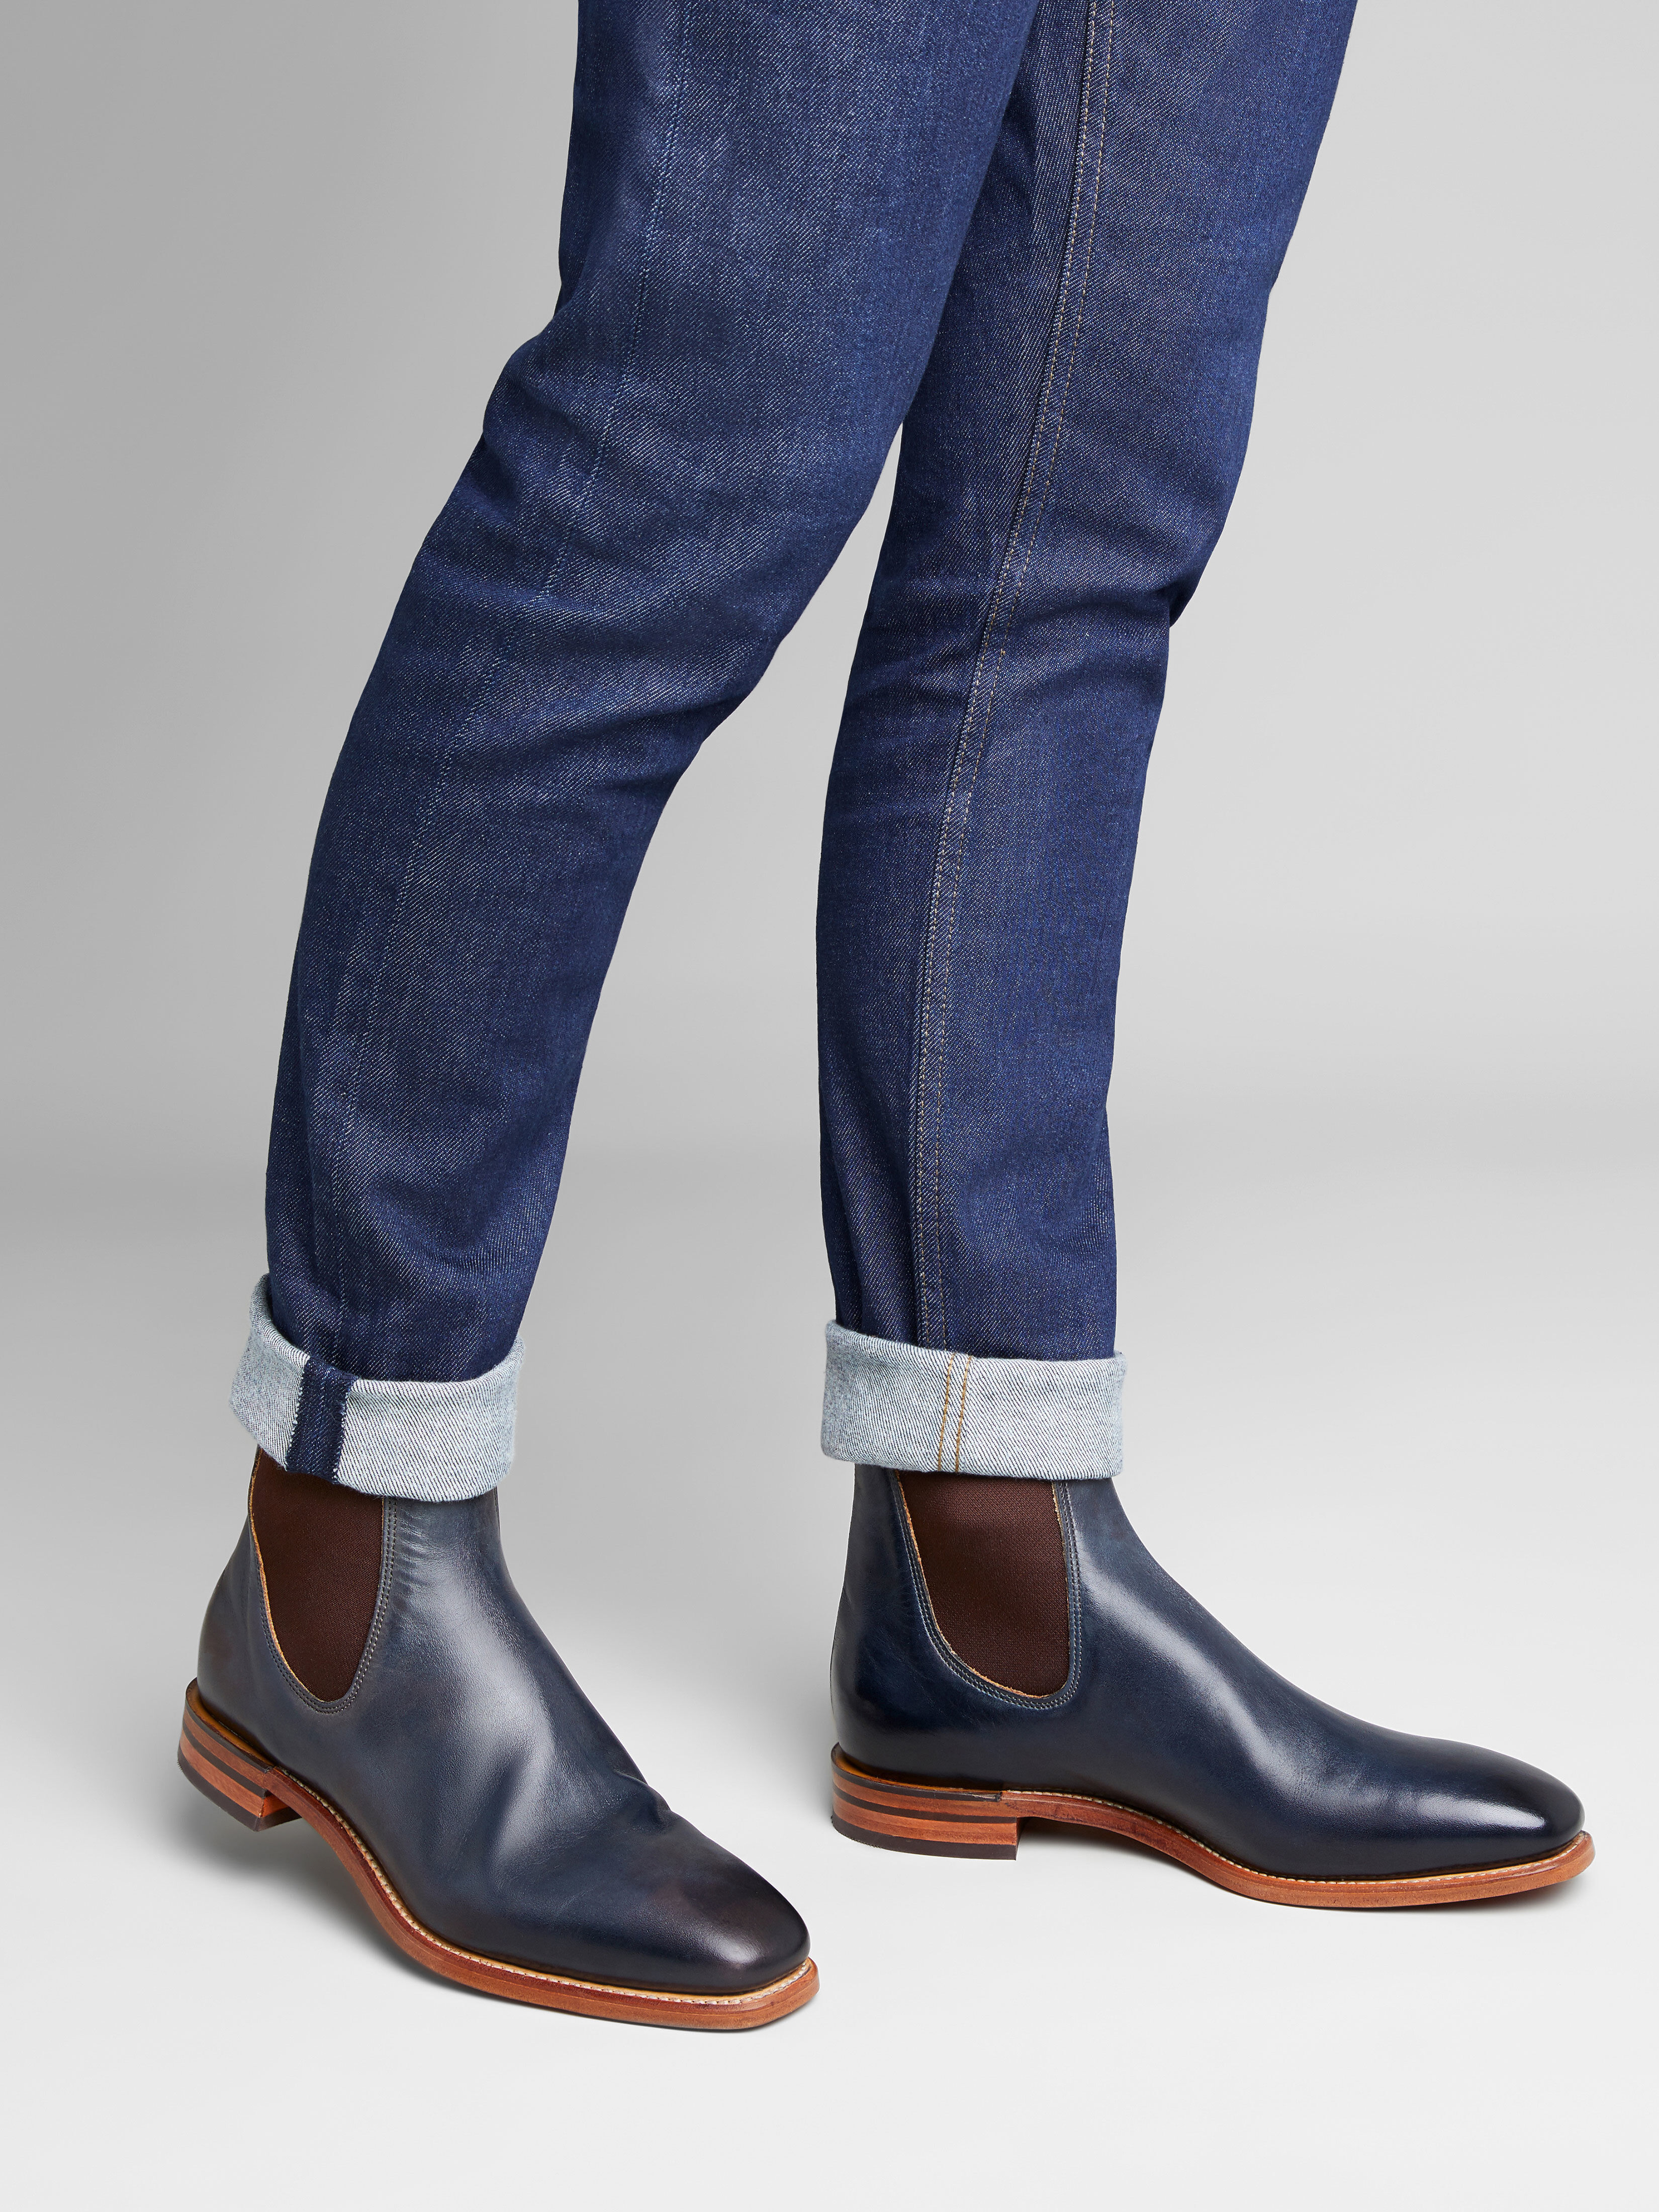 rm williams style boots